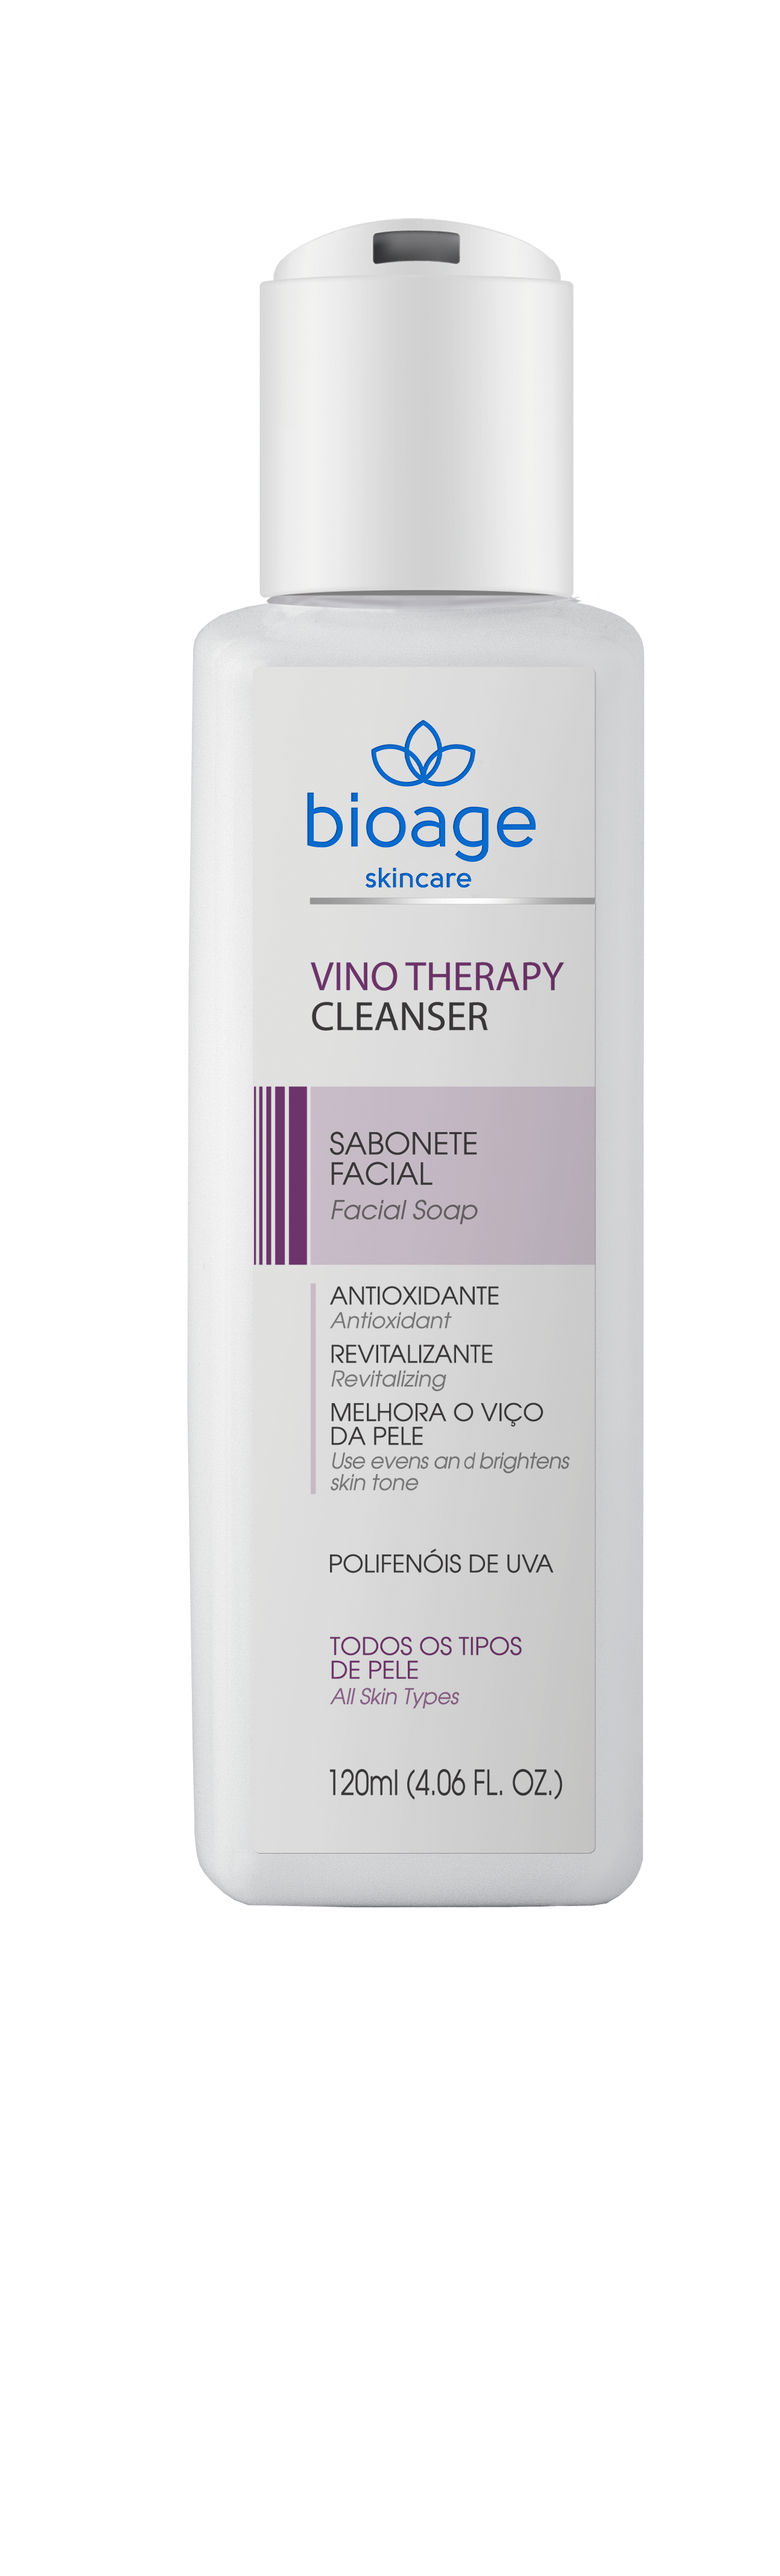 VINO THERAPY CLEANSER 120ML HOME CARE